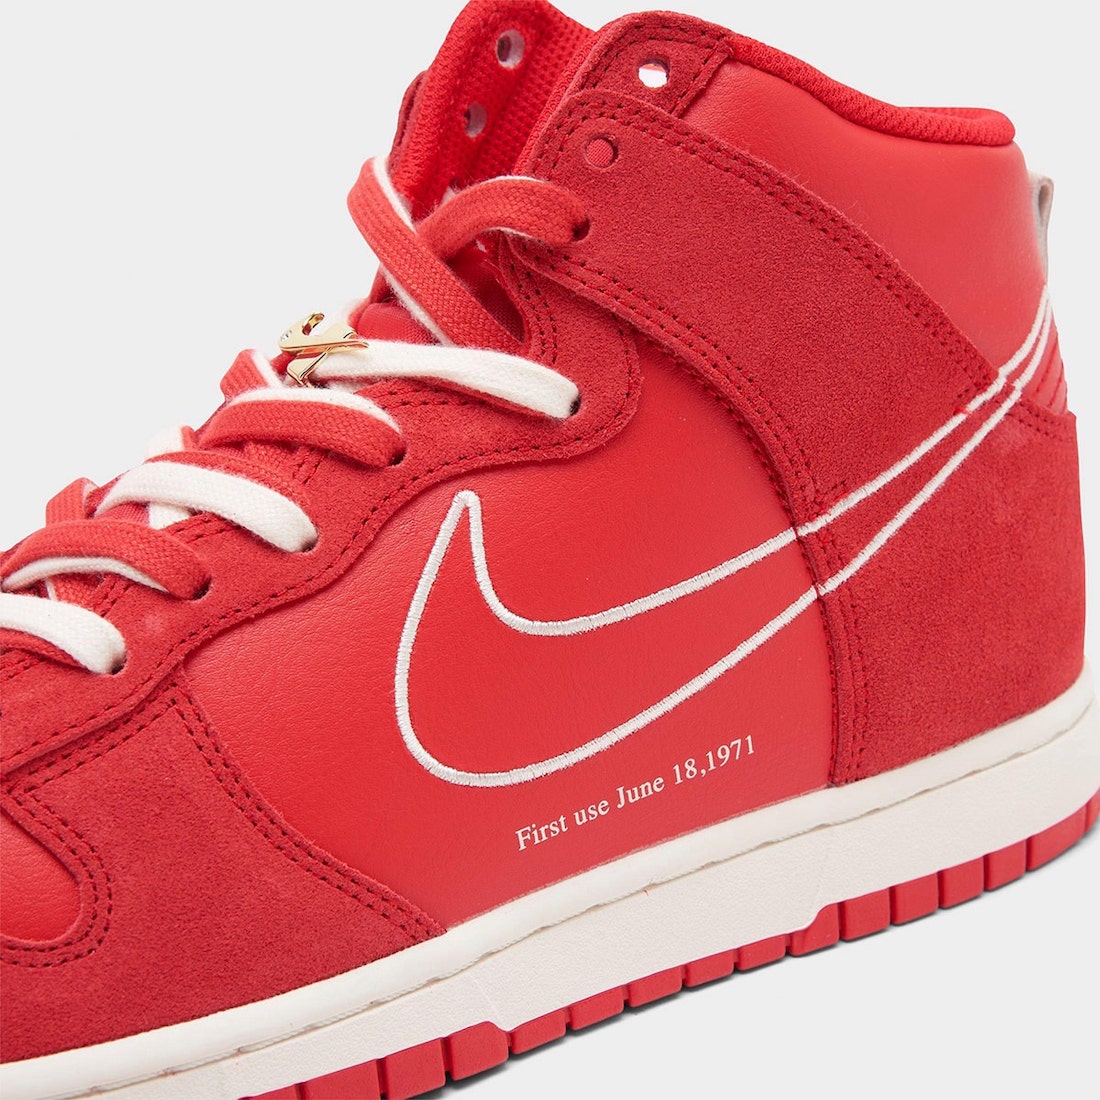 Nike Dunk High University Red Sail DH0960-600 Release Date